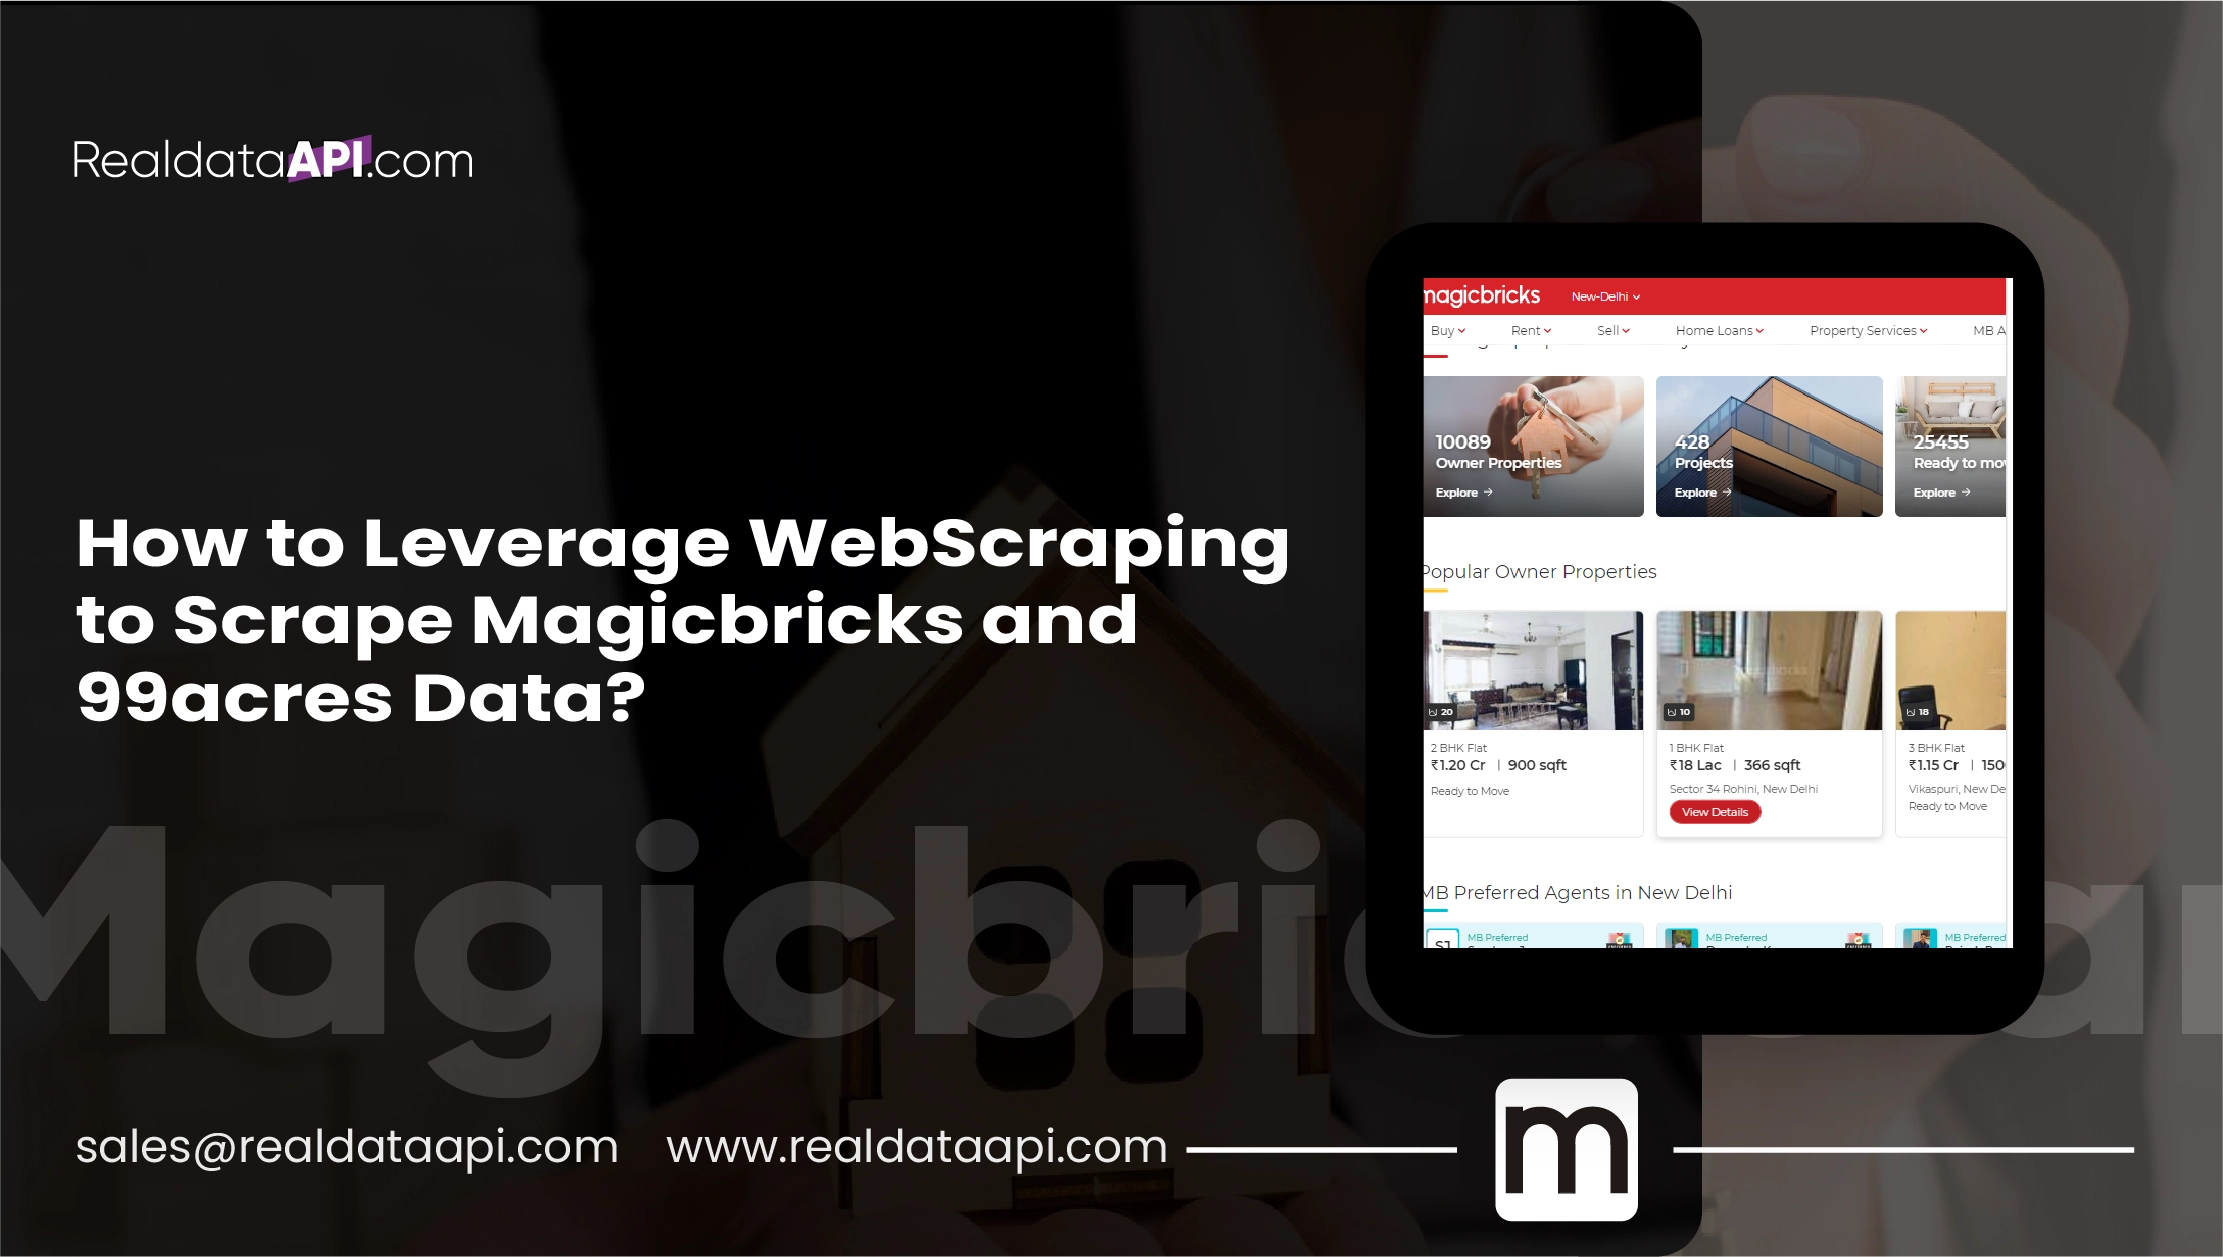 How-to-Leverage-Web-Scraping-to-Scrape-Magicbricks-and-99acres-Data-01